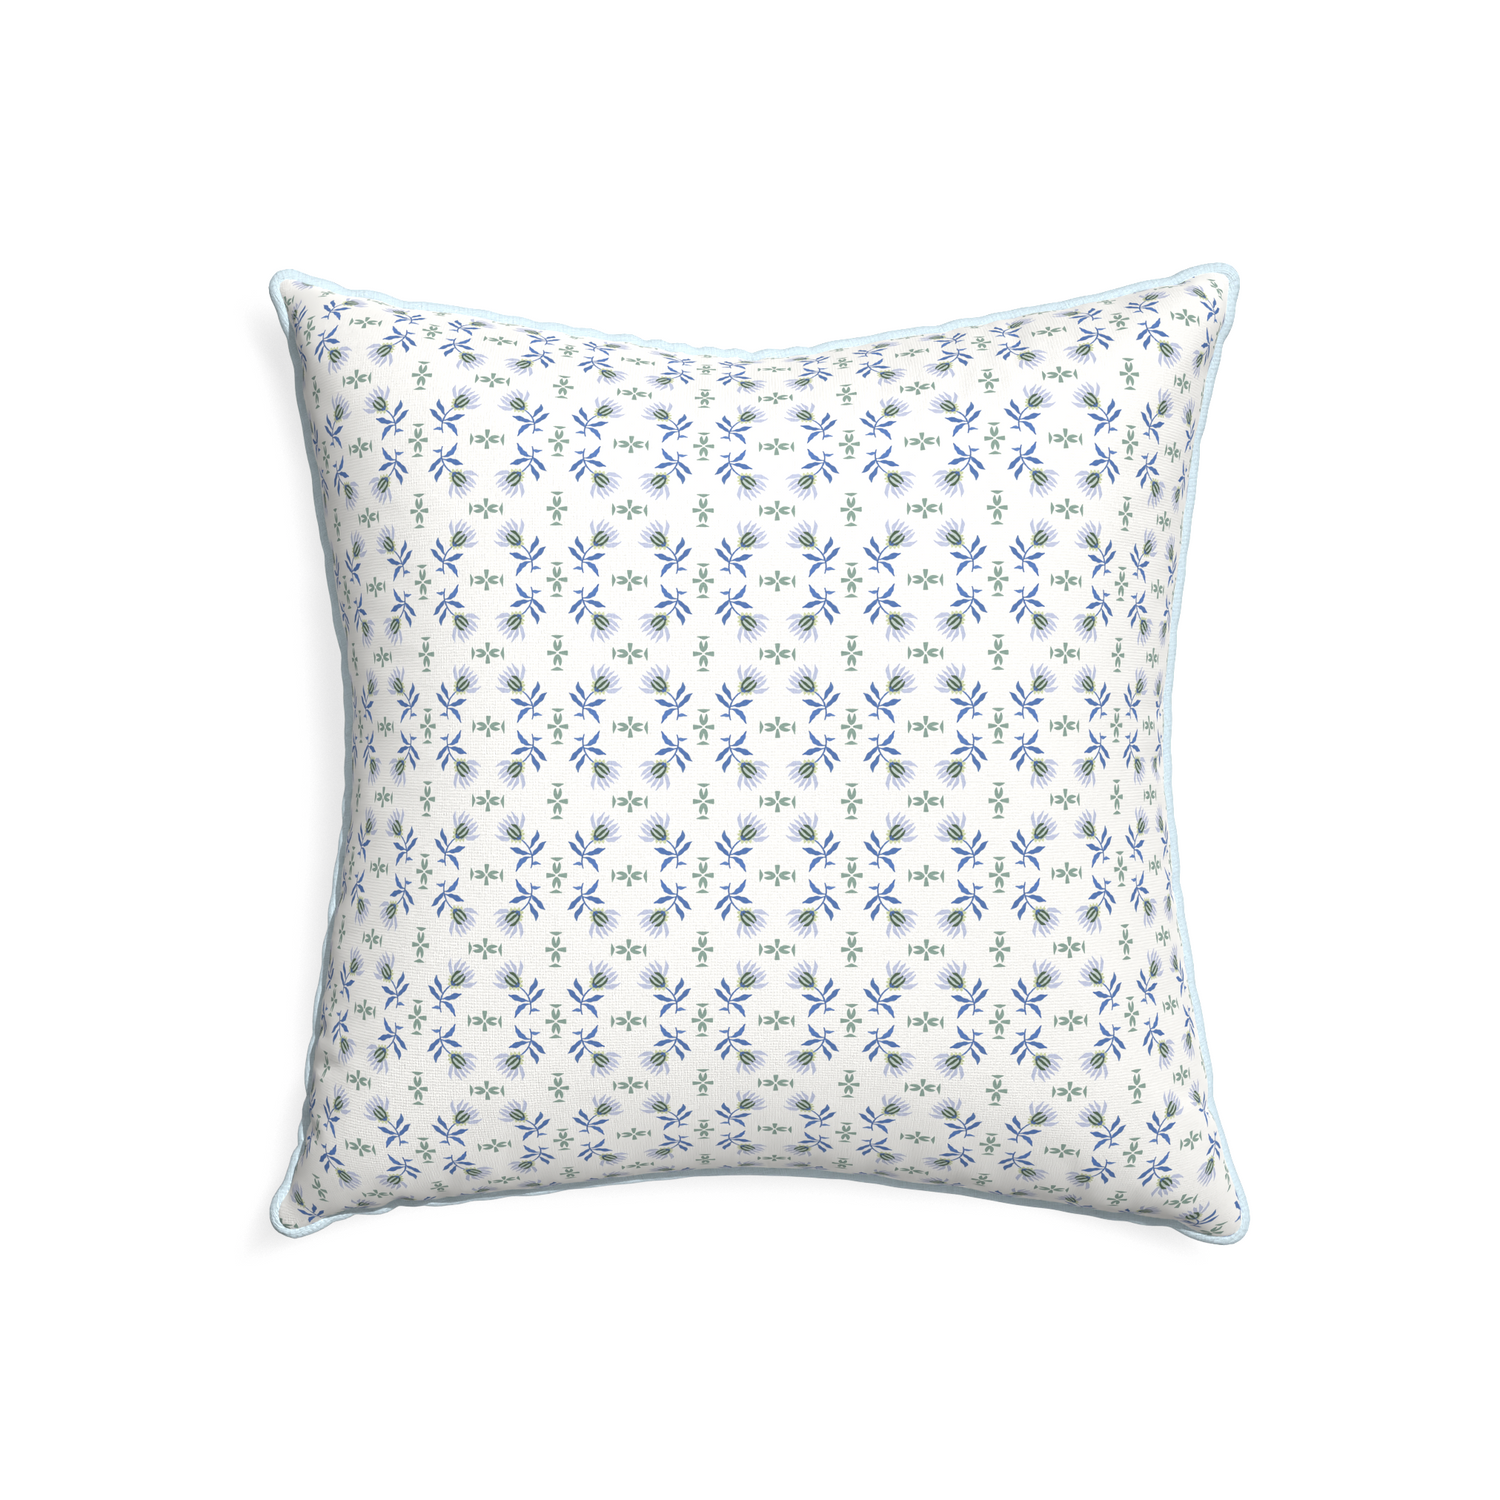 22-square lee custom blue & green floralpillow with powder piping on white background